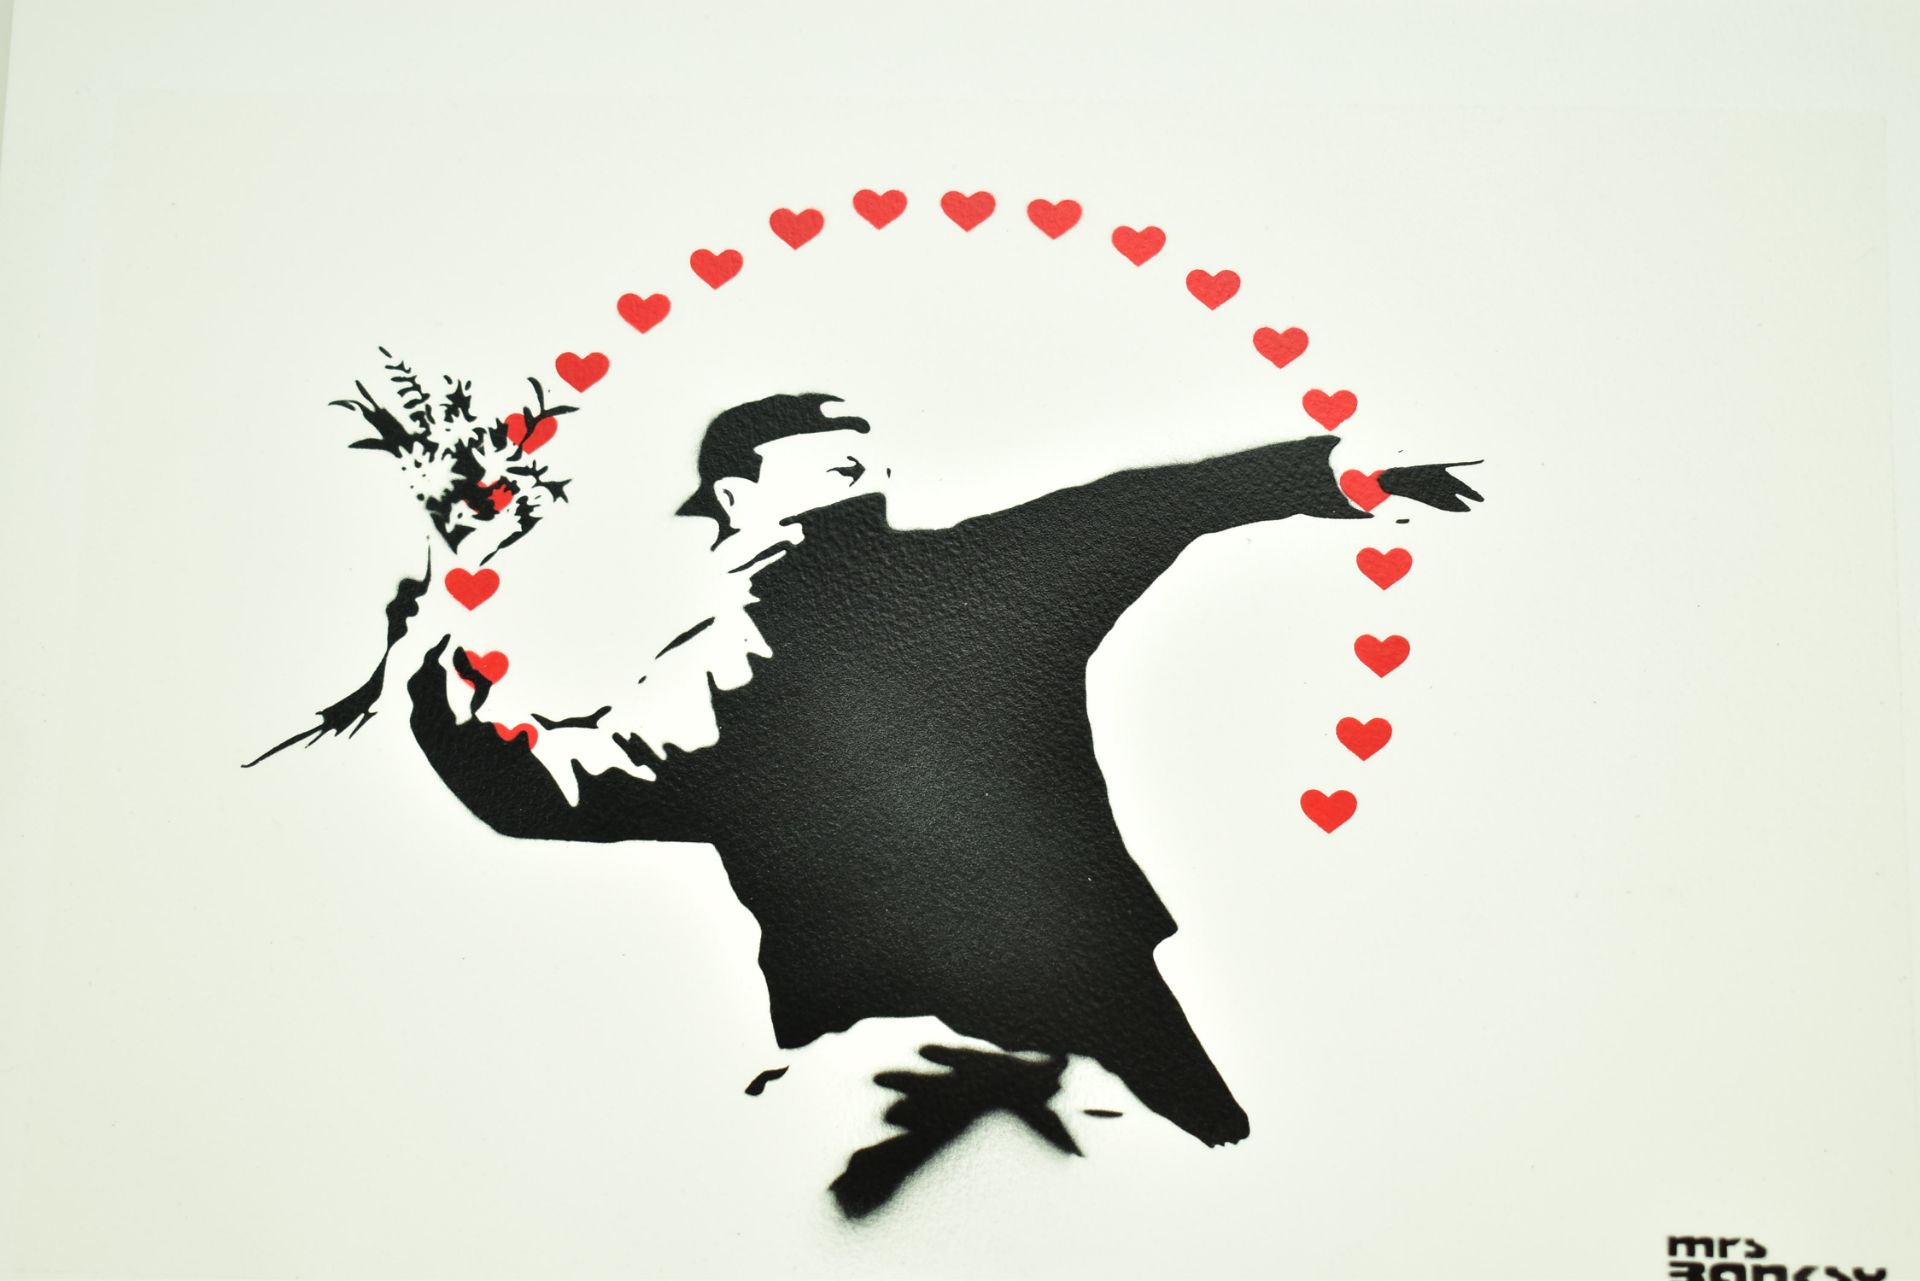 MRS BANKSY (BRITISH) - FLOWER THROWER - LOVE IS IN THE AIR - Image 2 of 11